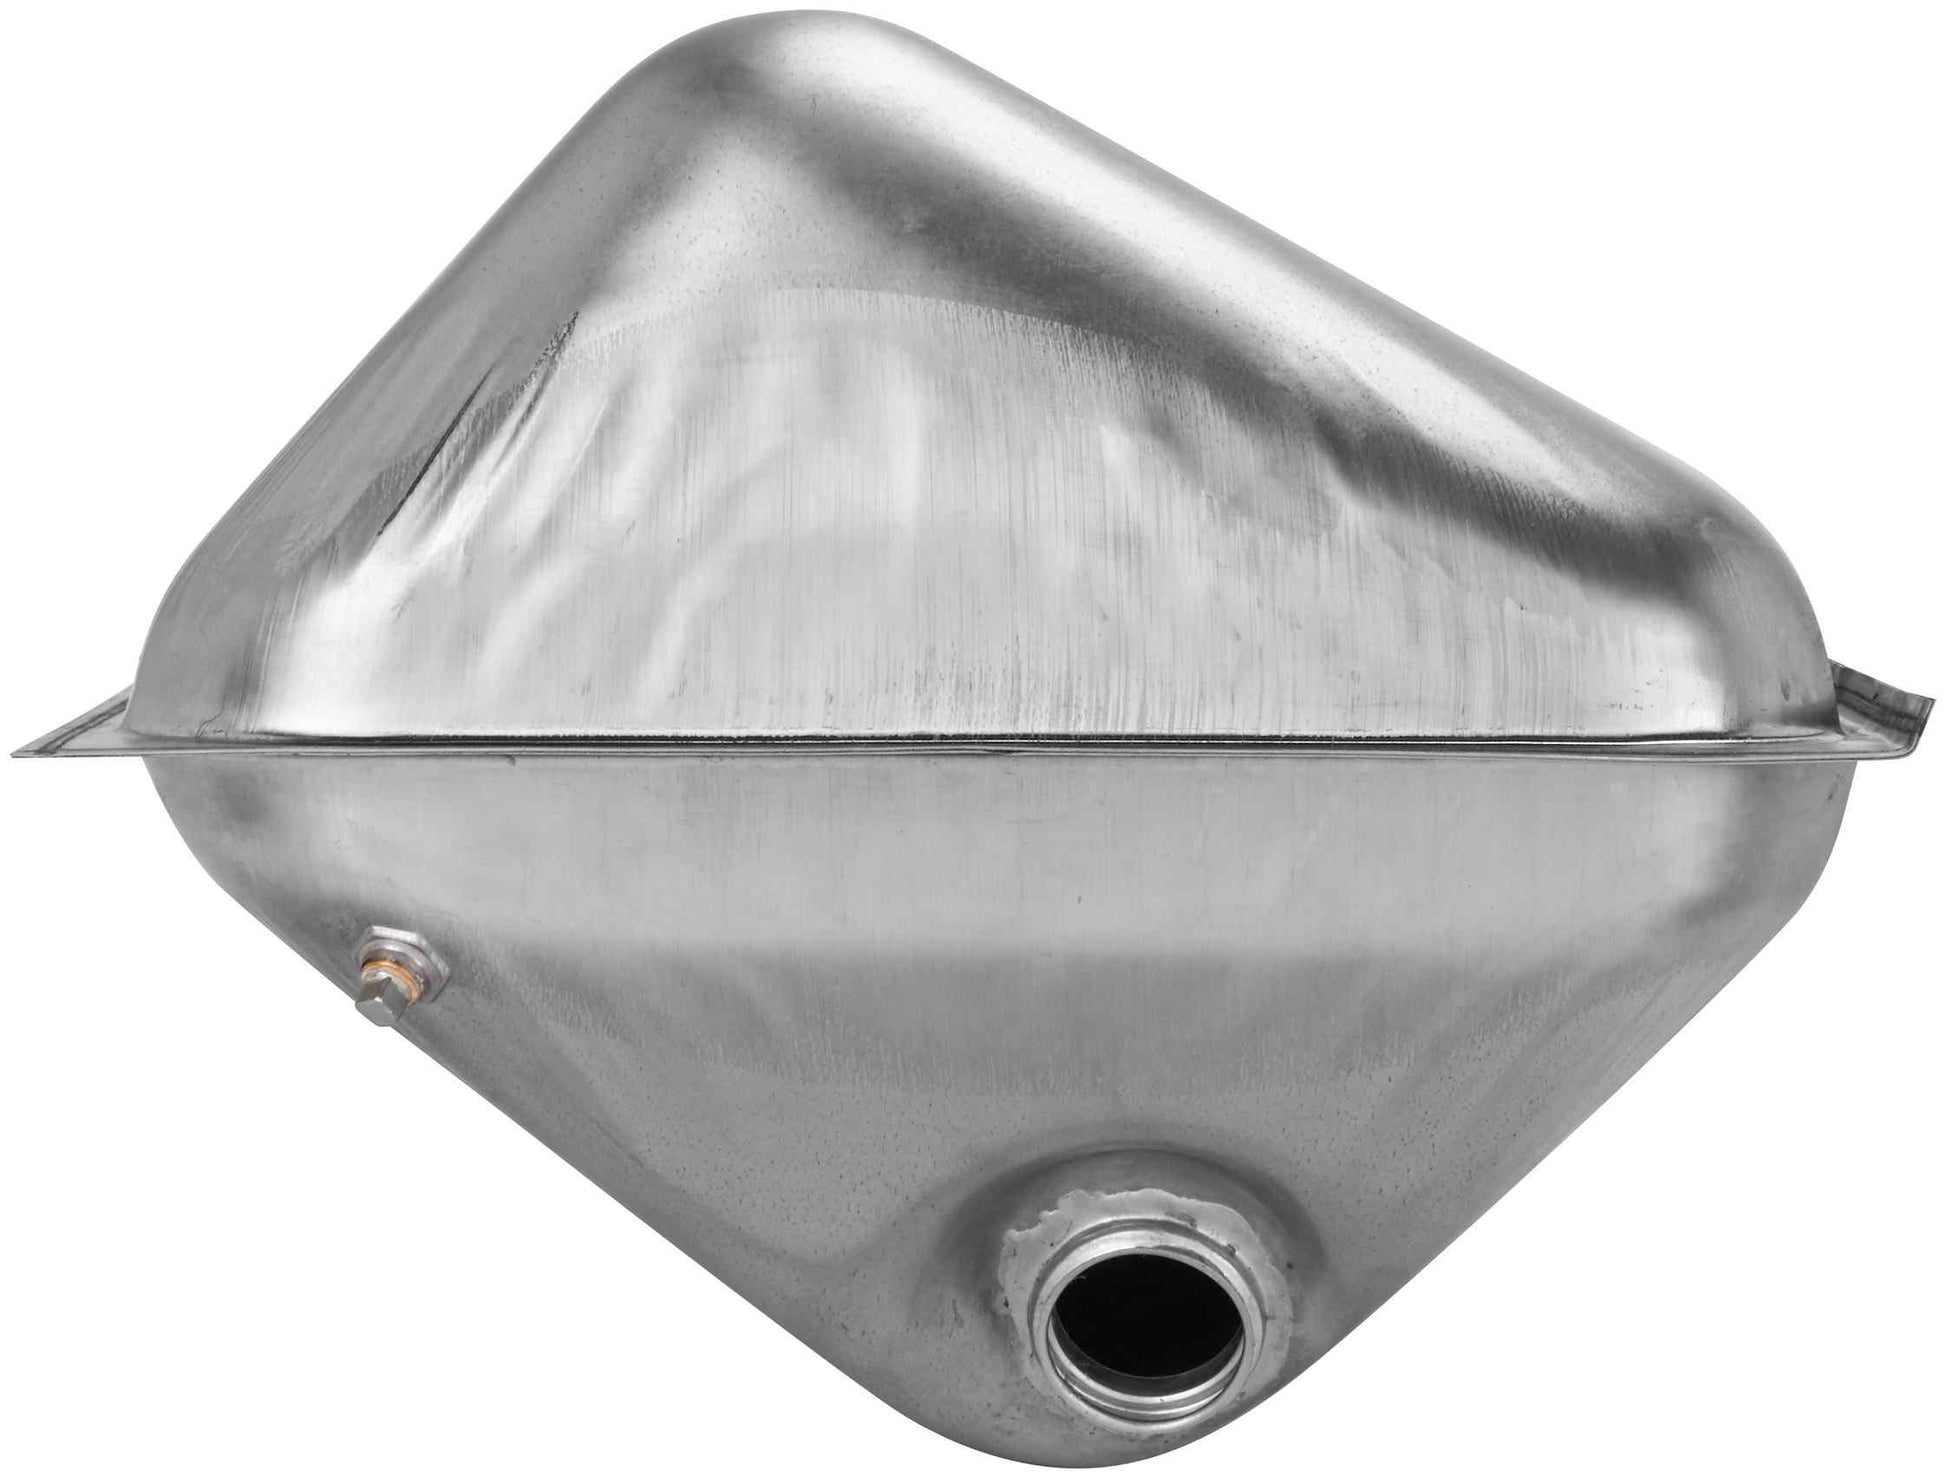 Left View of Fuel Tank SPECTRA F37B